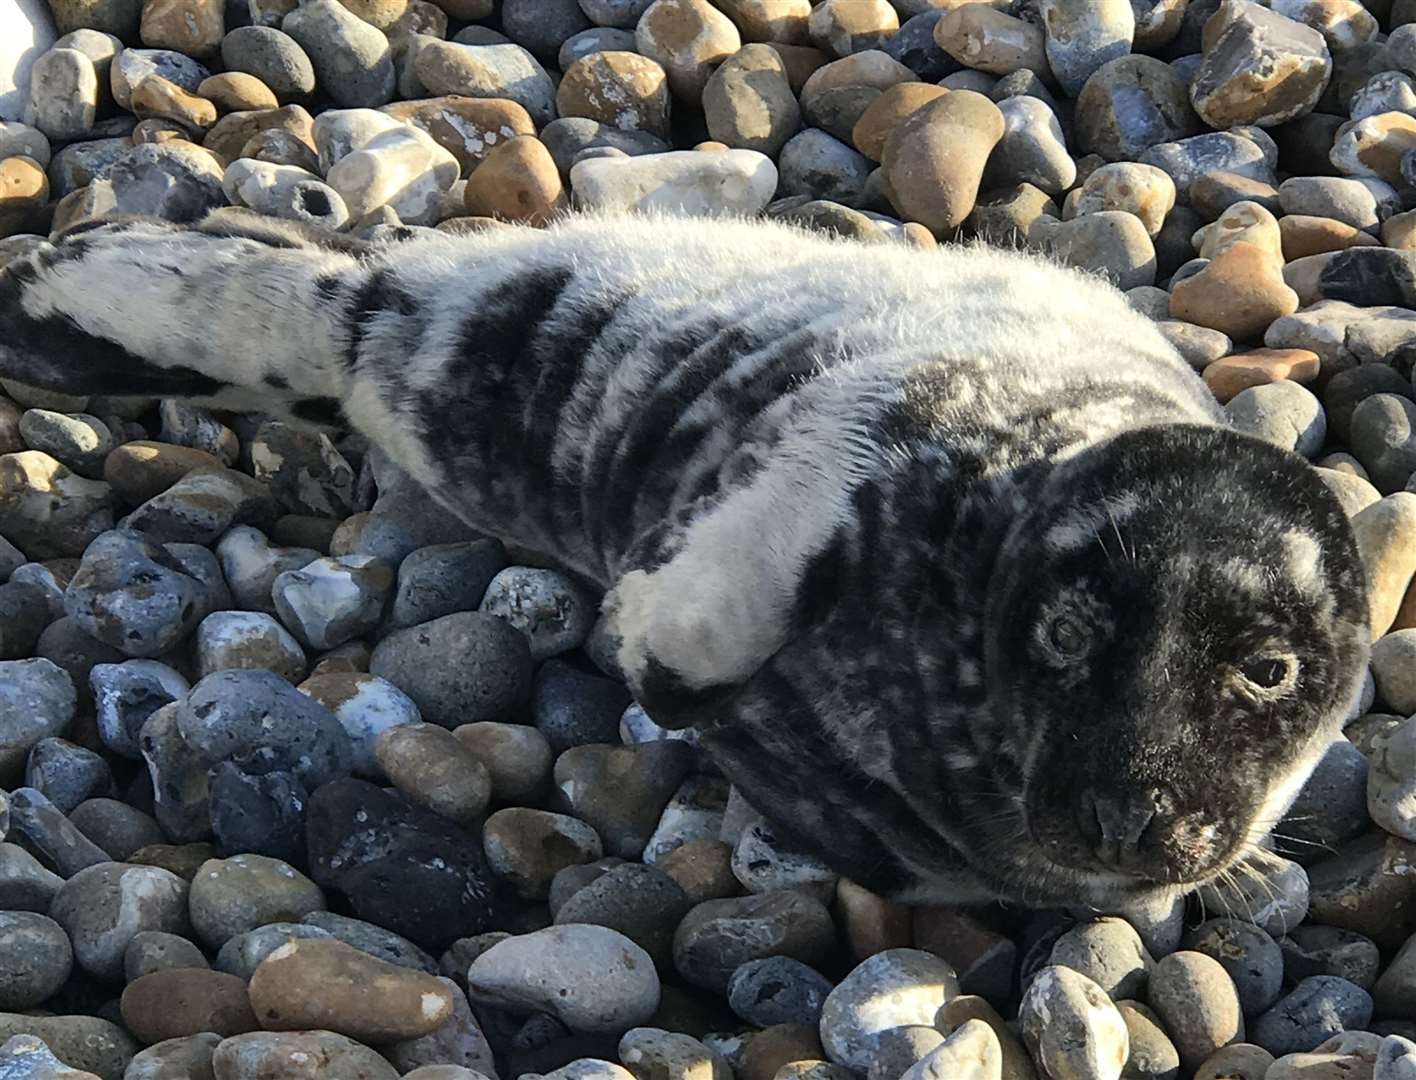 Nanta was found on Hythe beach on Christmas Eve. Picture: RSPCA (43770364)